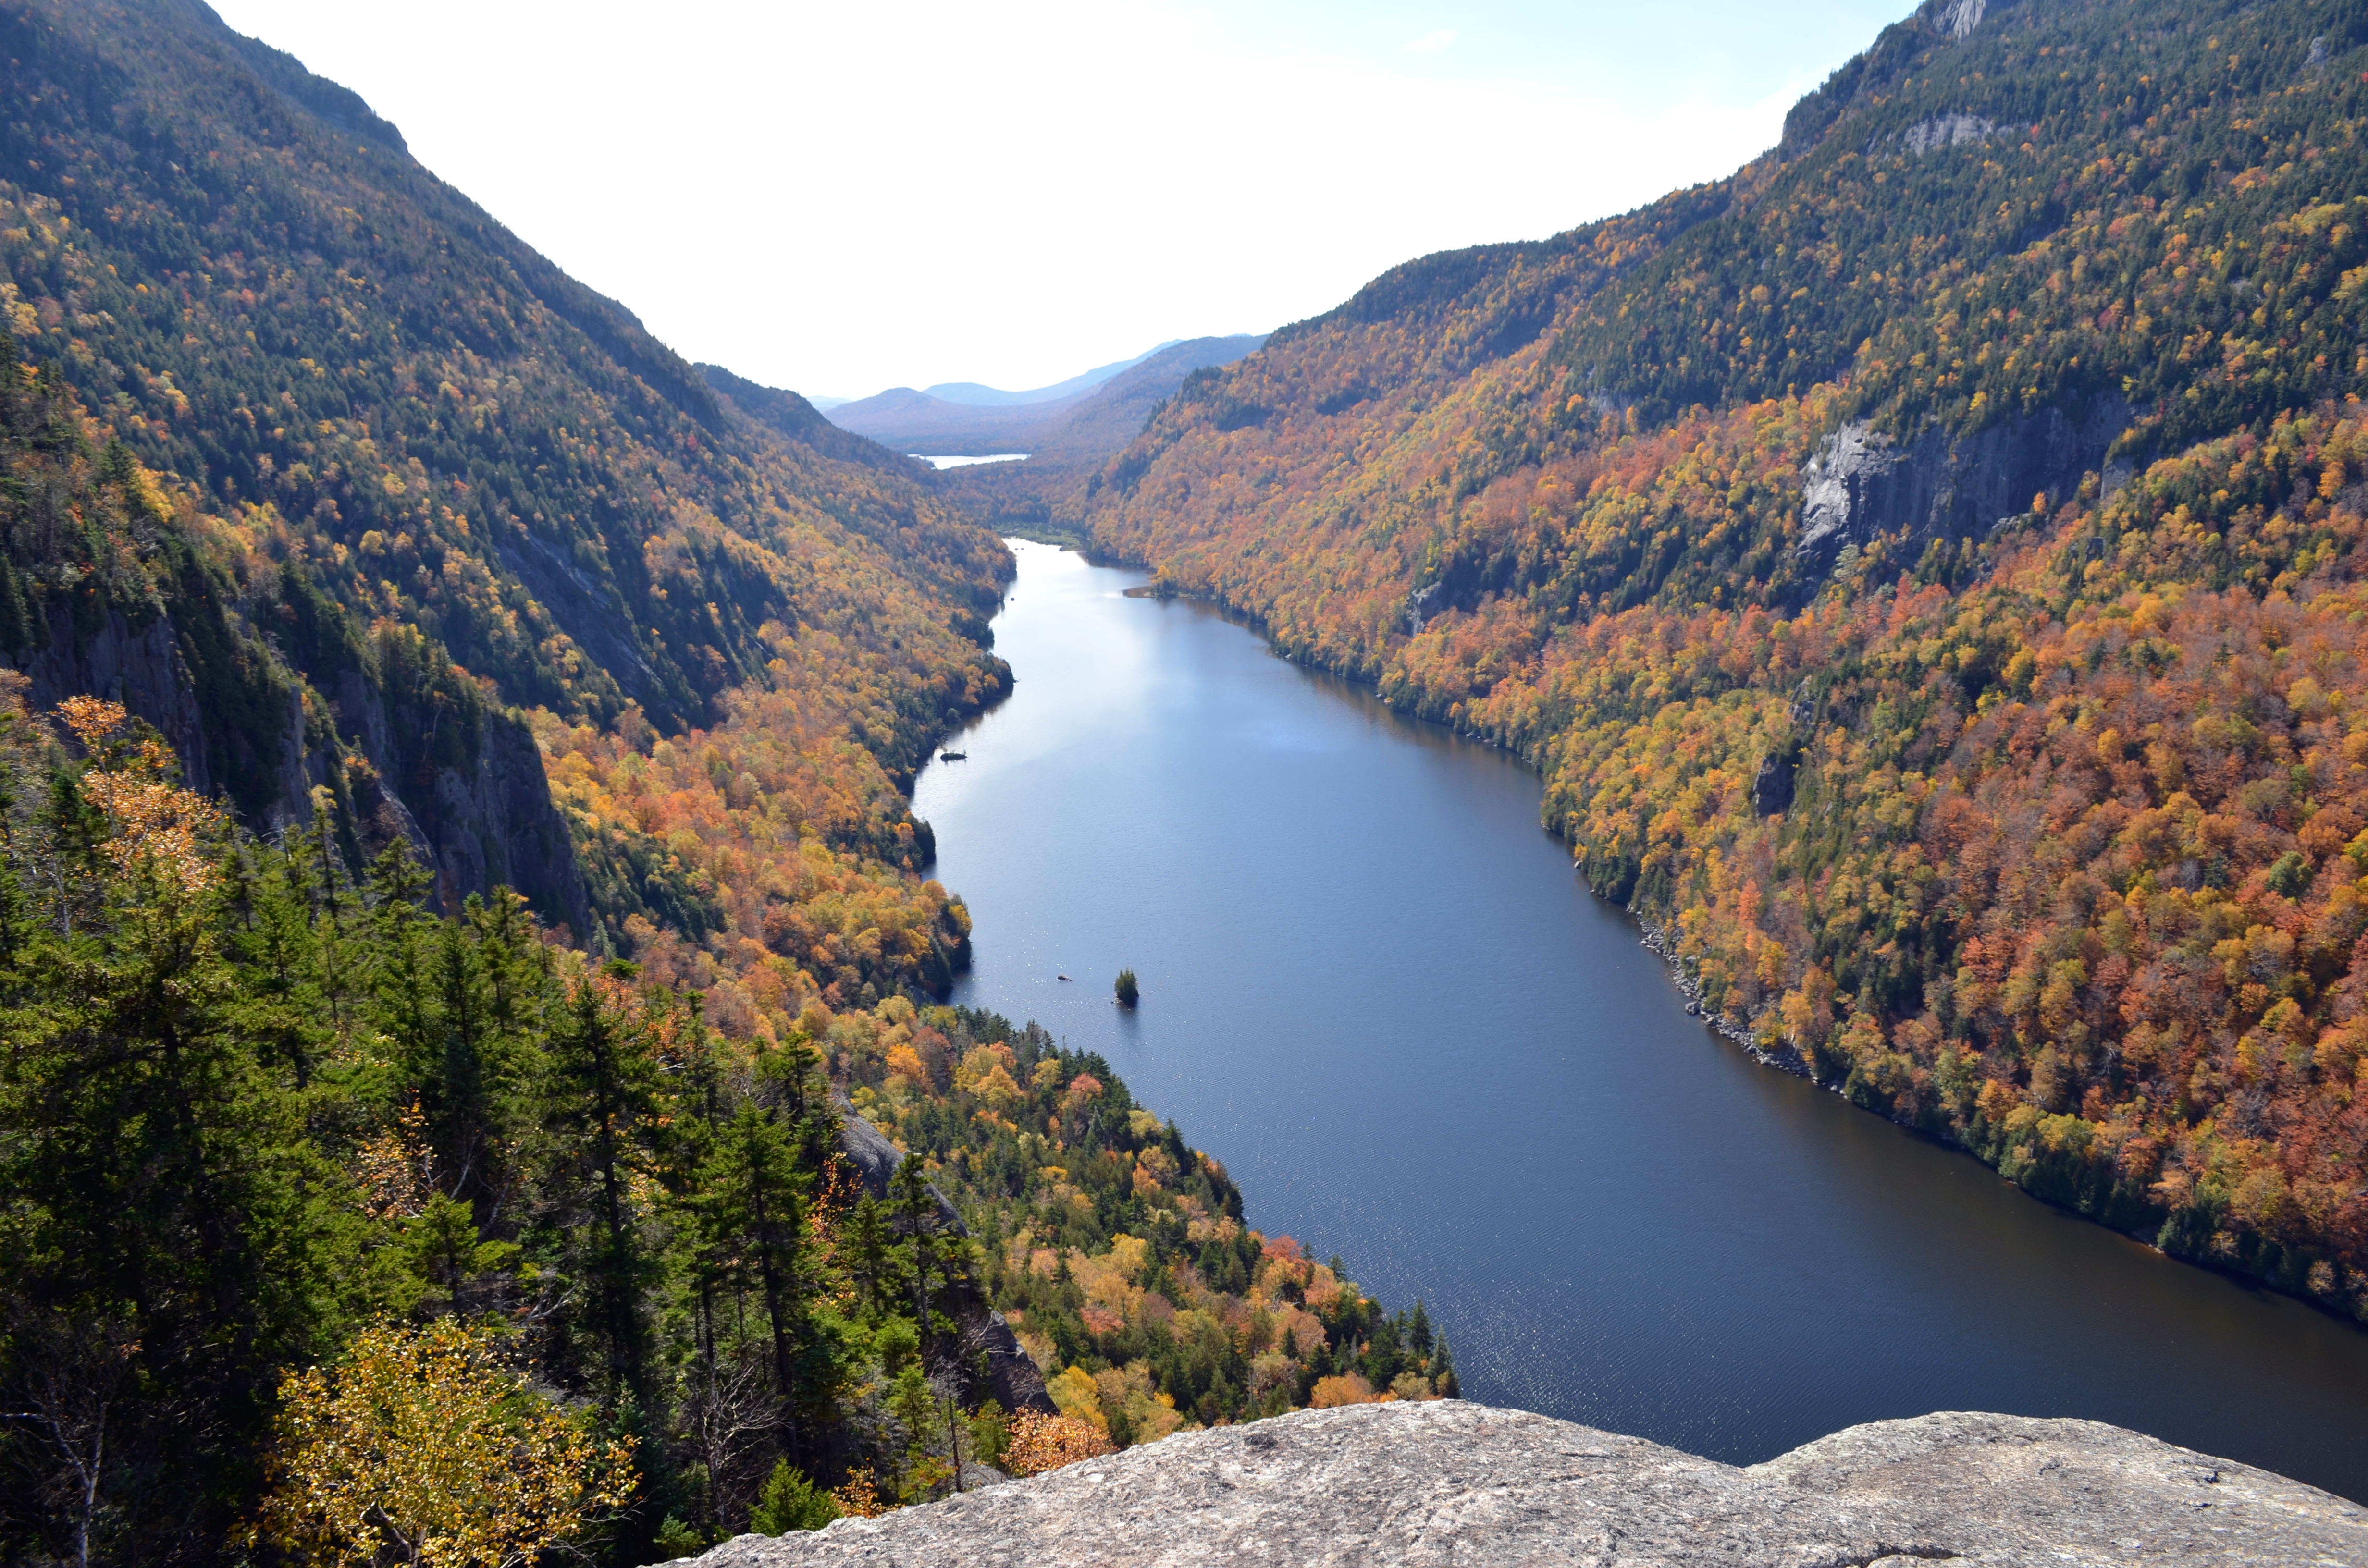 Lower Ausable Lake